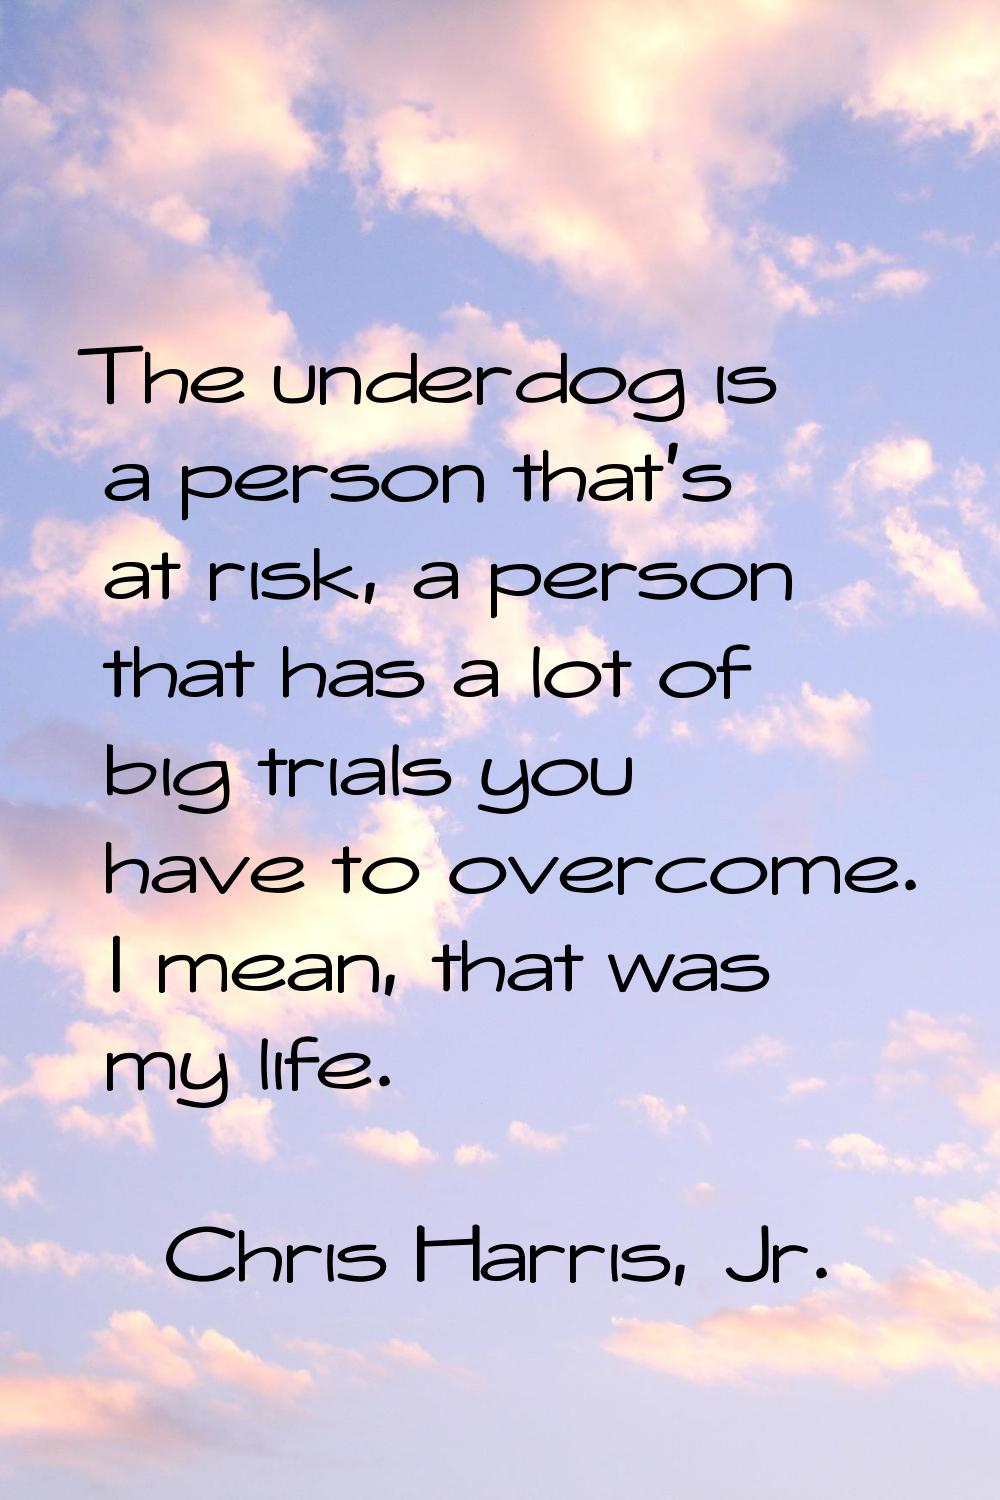 The underdog is a person that's at risk, a person that has a lot of big trials you have to overcome